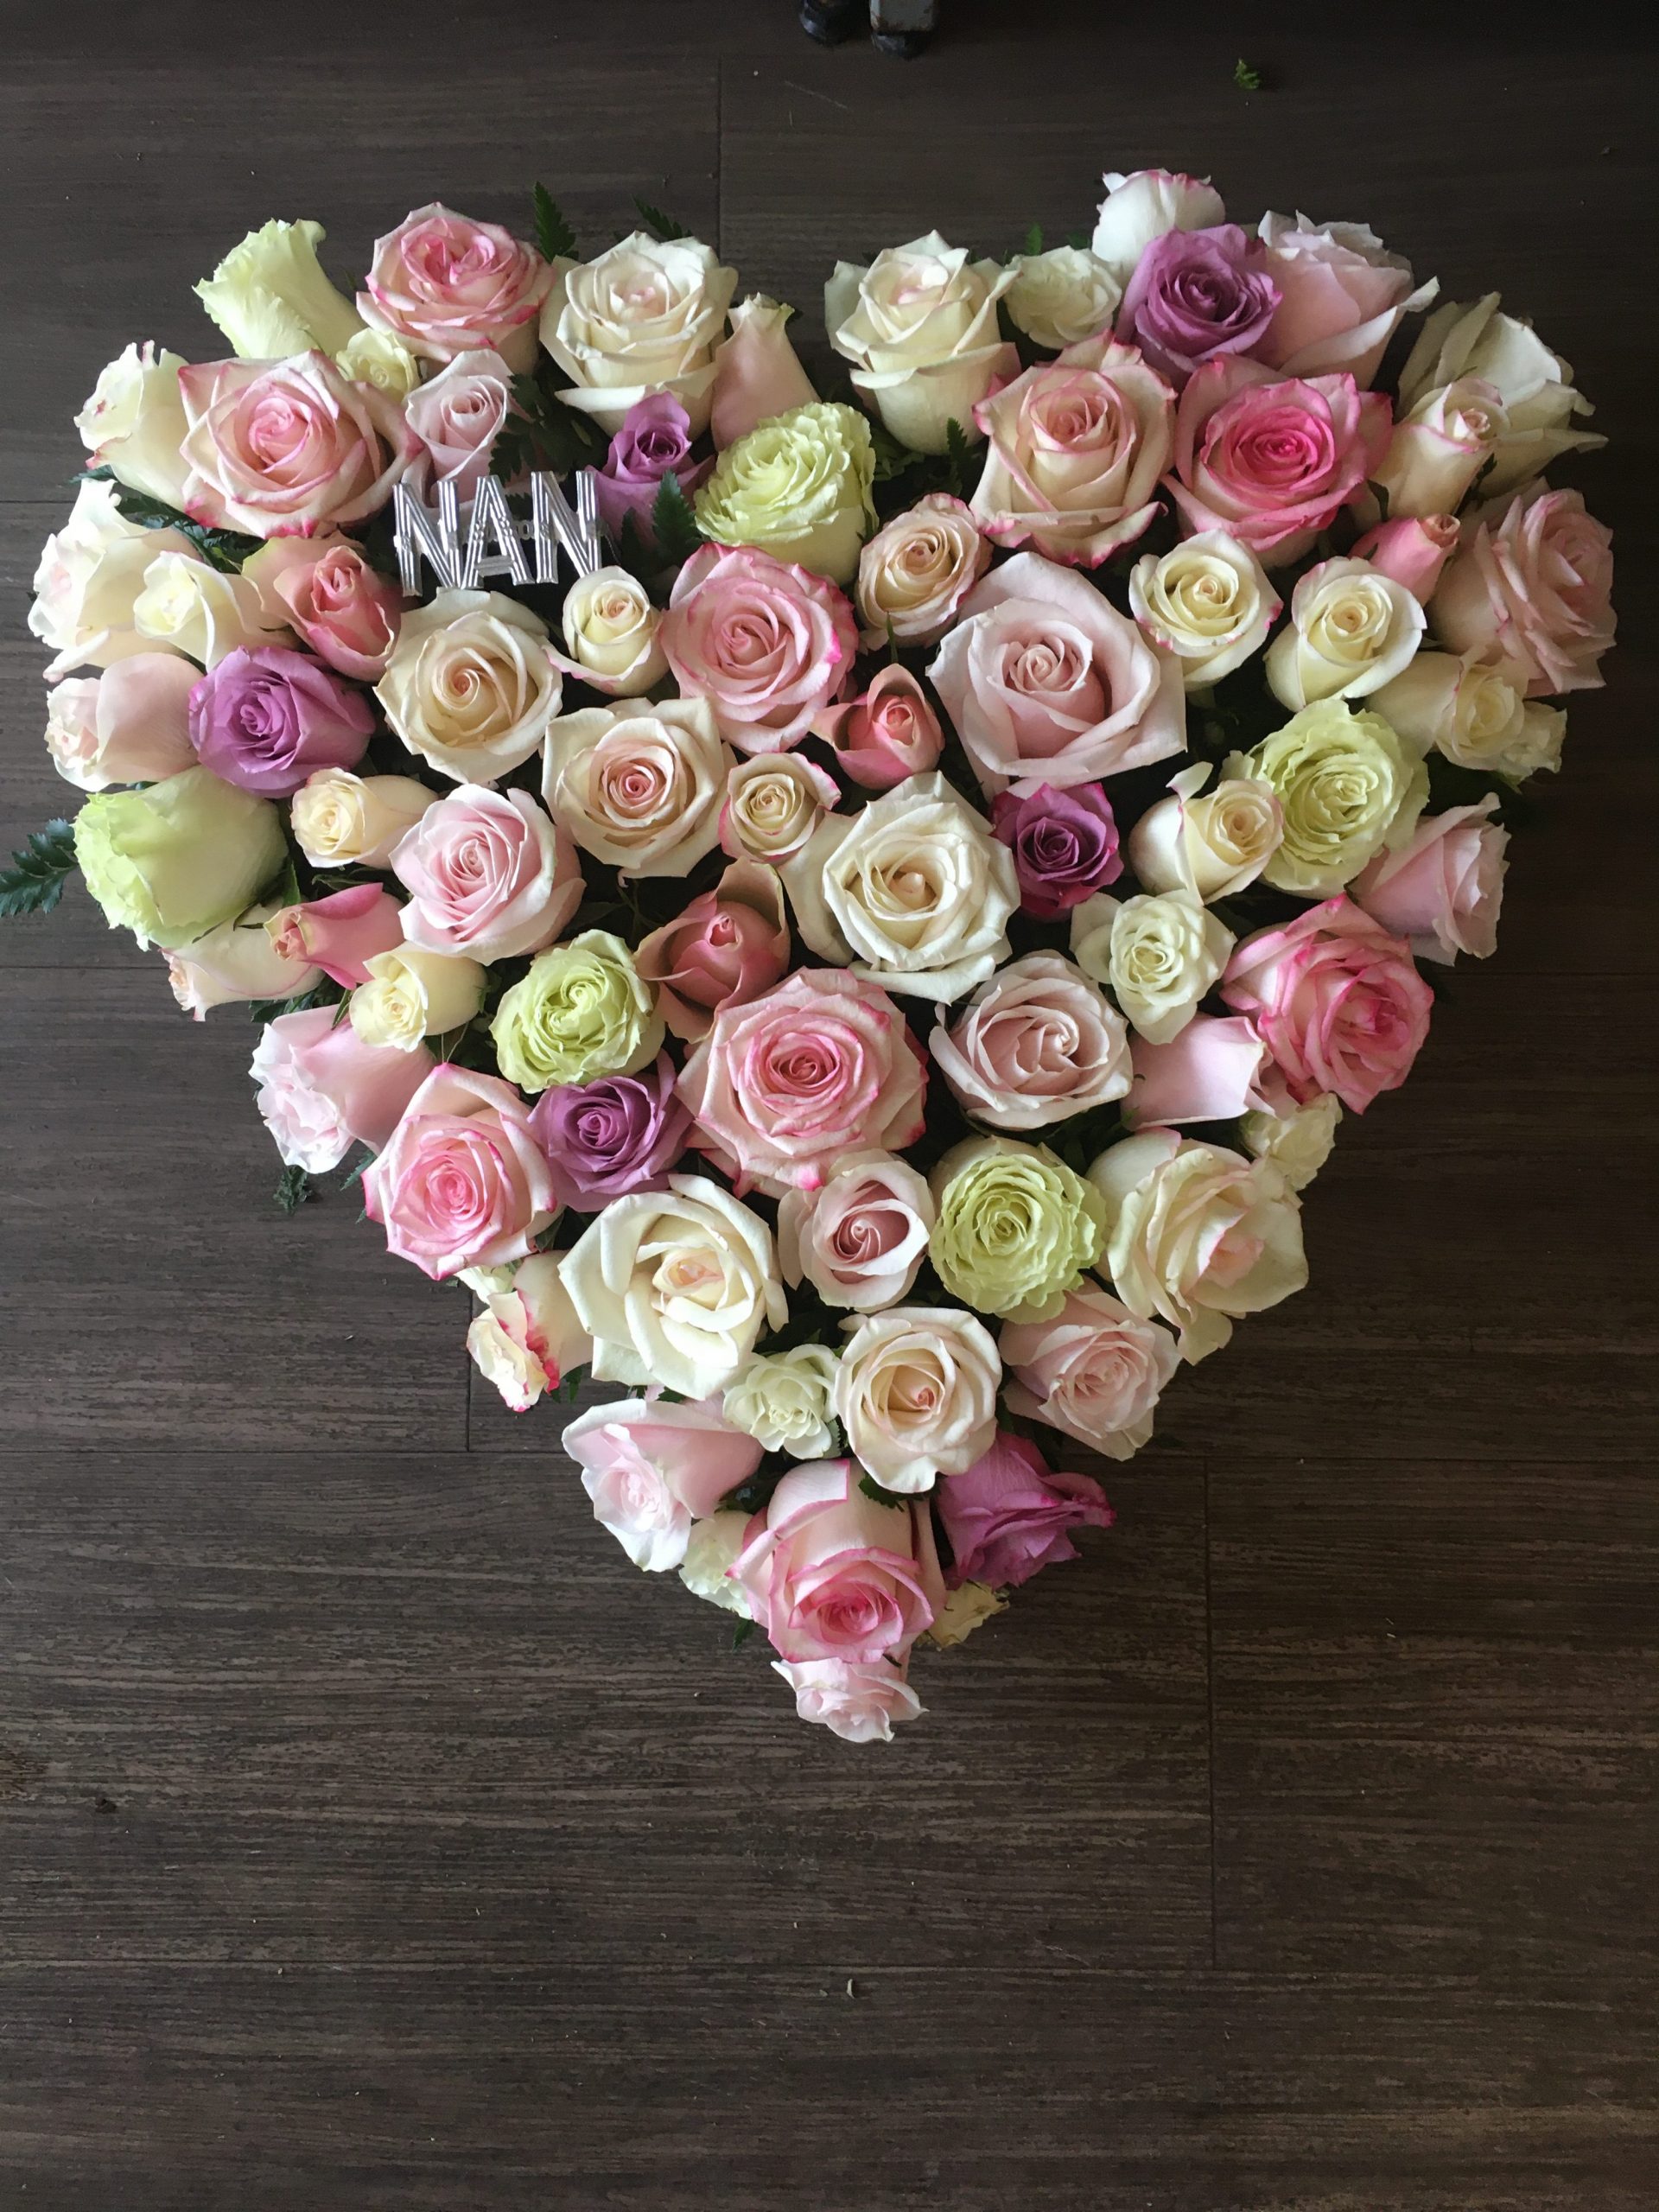 Solid heart of roses funeral flowers